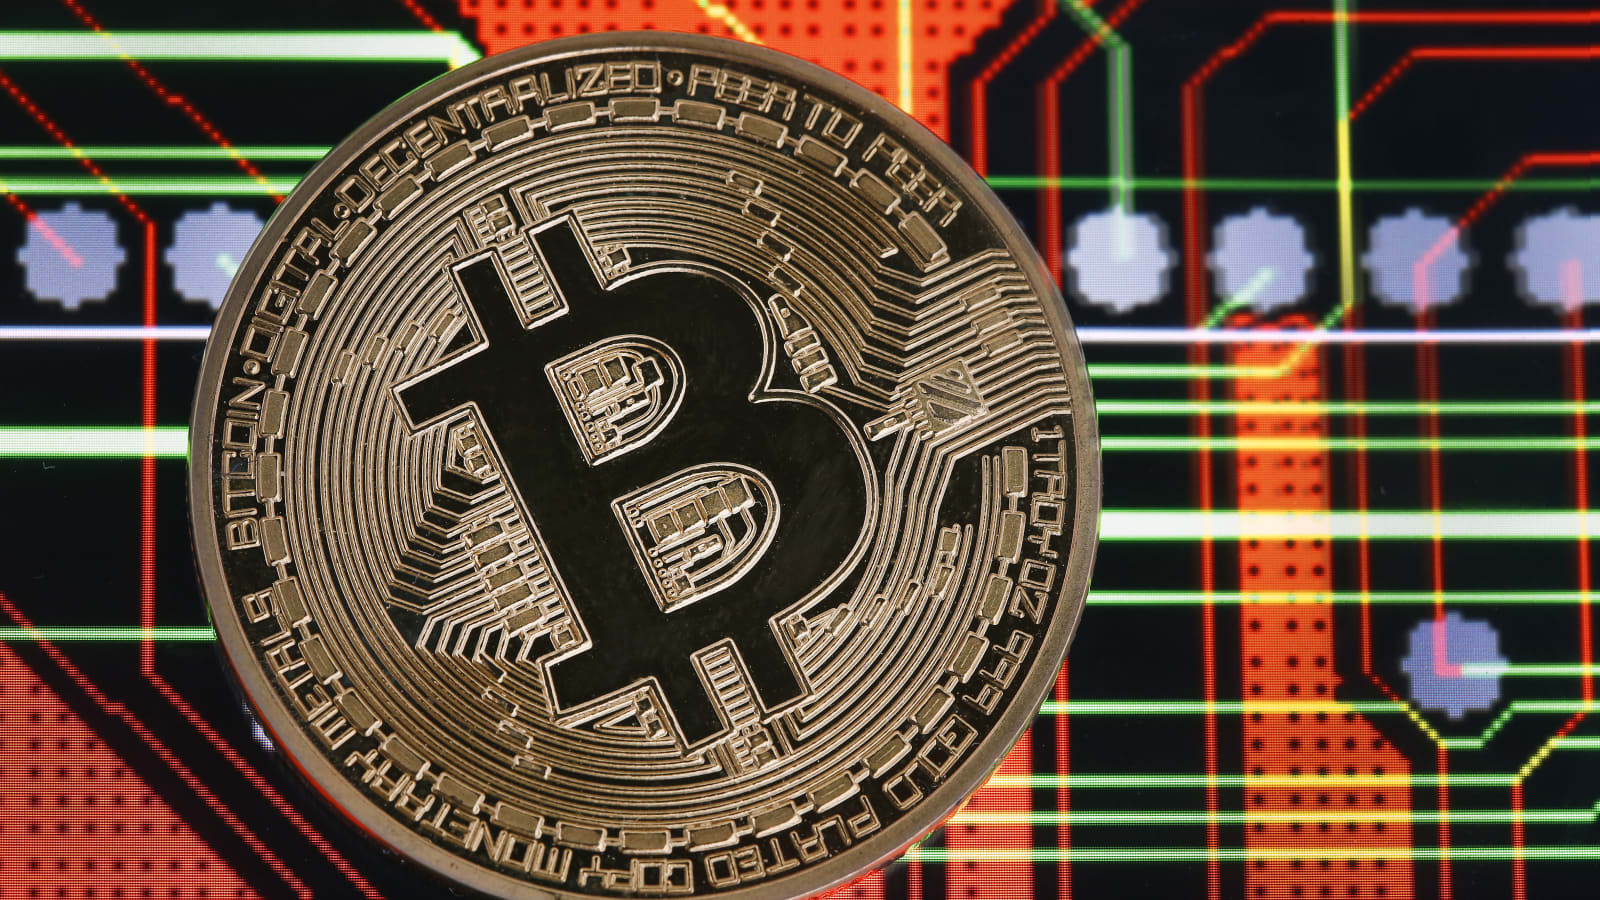 Is It A Good Idea To Buy Bitcoin Now : Should You Buy Bitcoin Right Now Soluco - The bitcoin break out is now confirmed by the strong bullish close above the range high area of 10,500.